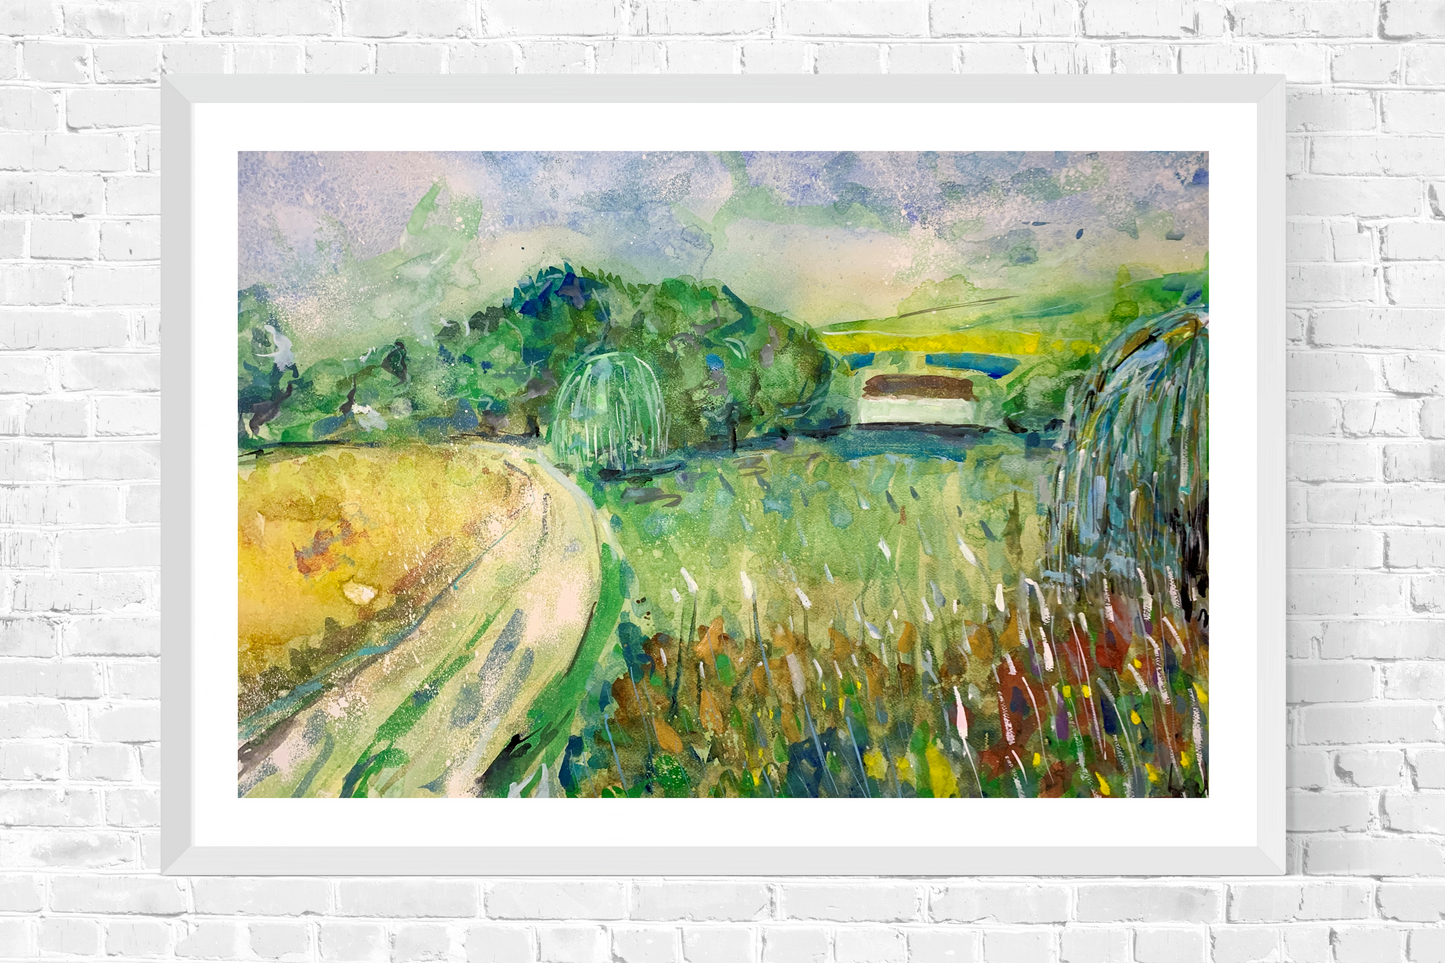 The Countryside Beside Me (Original, Signed and Framed)